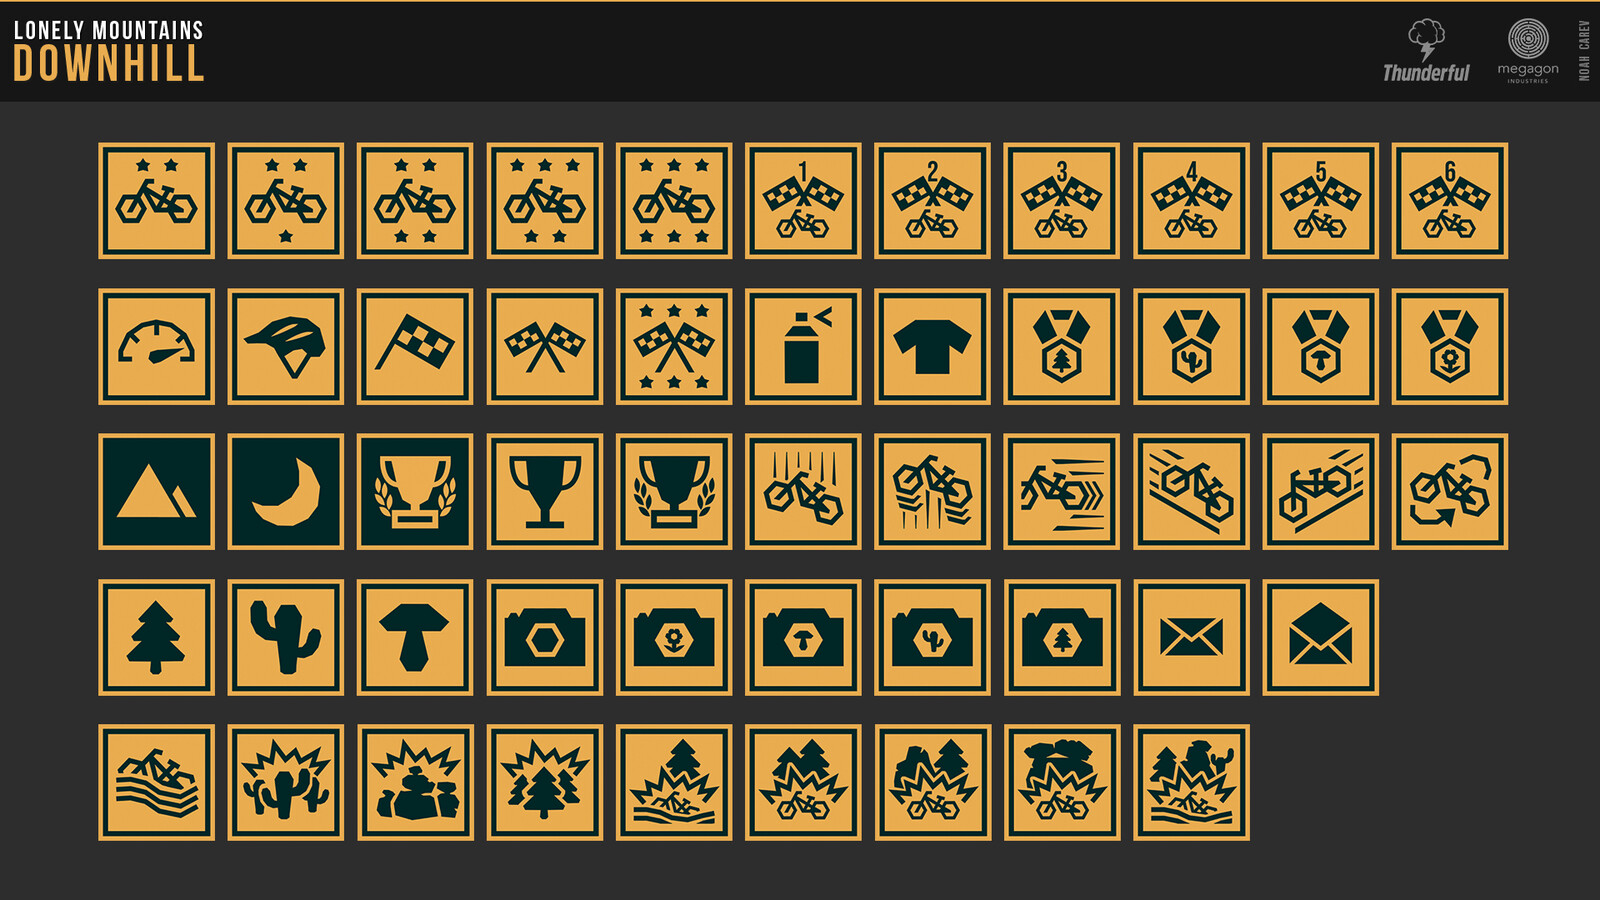 Achievement icons made for steam and consols.